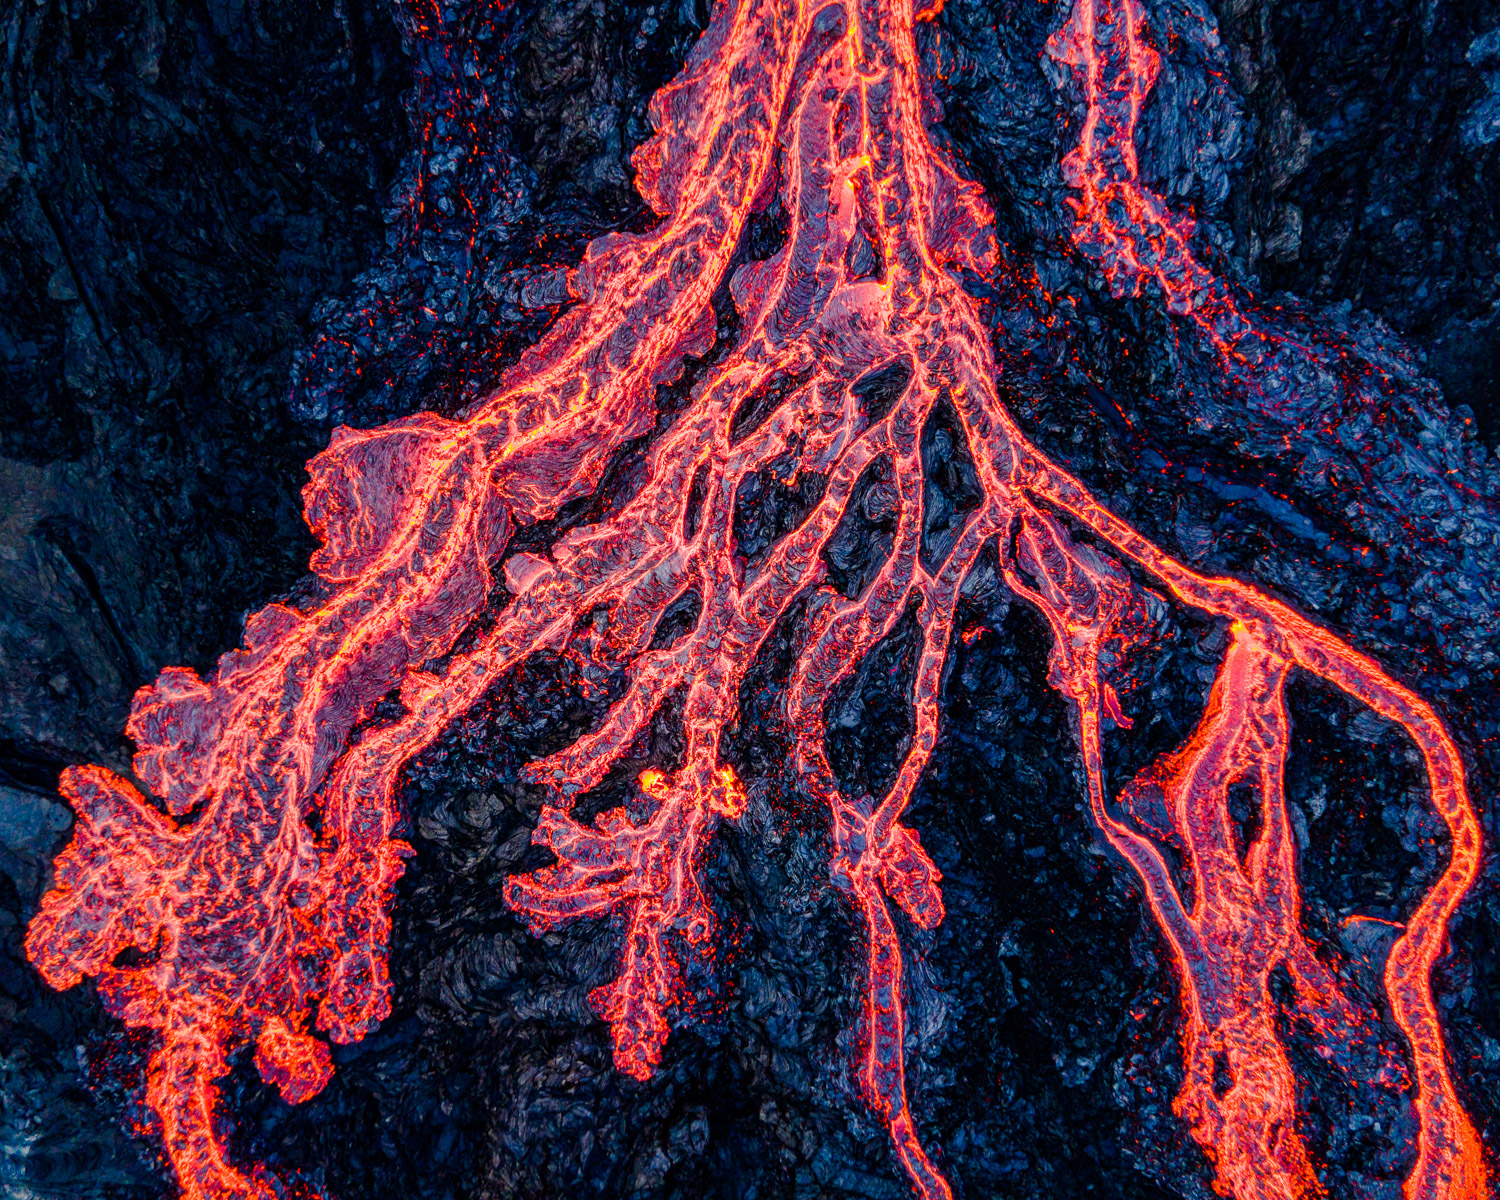 Fagradalsfjall Volcano molten lava abstract photography from Iceland. 